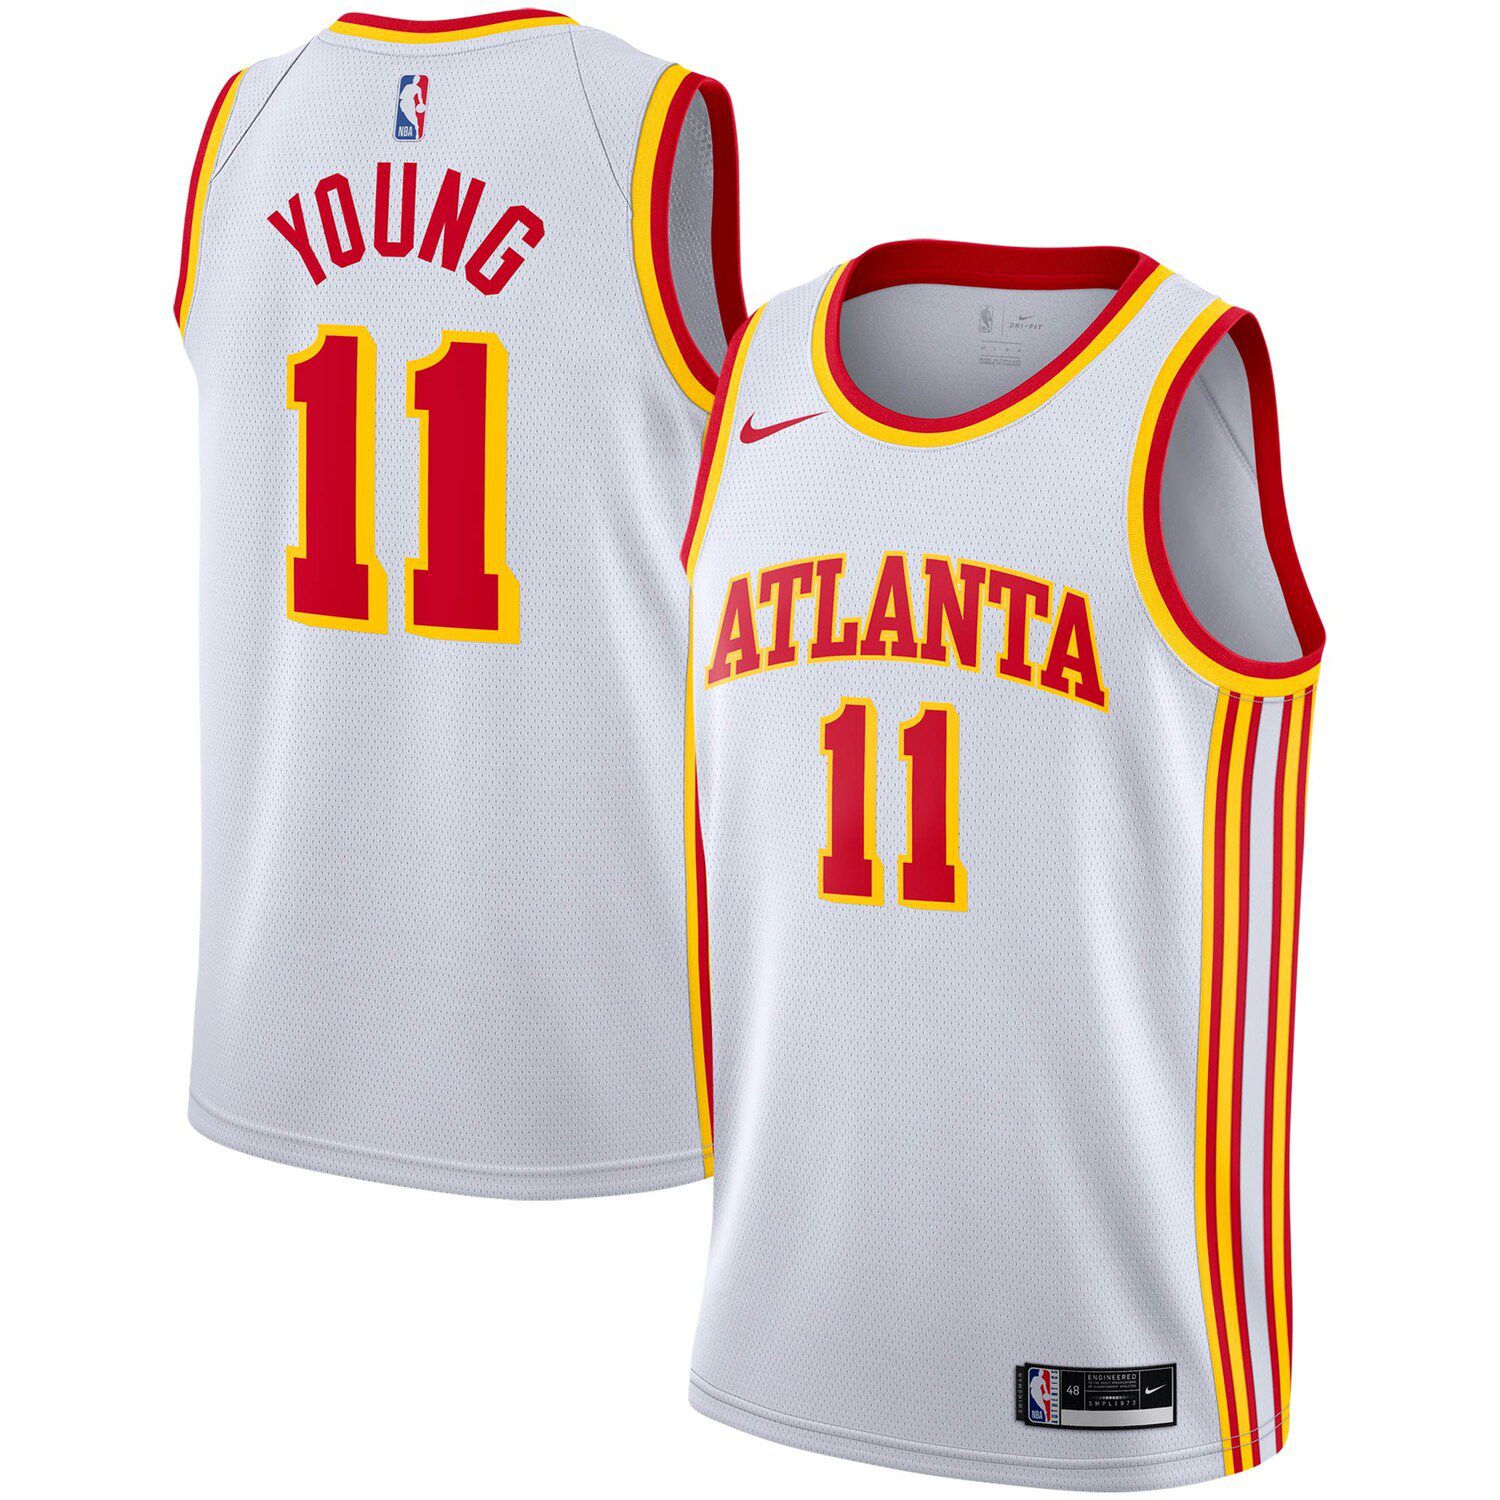 trae young jersey